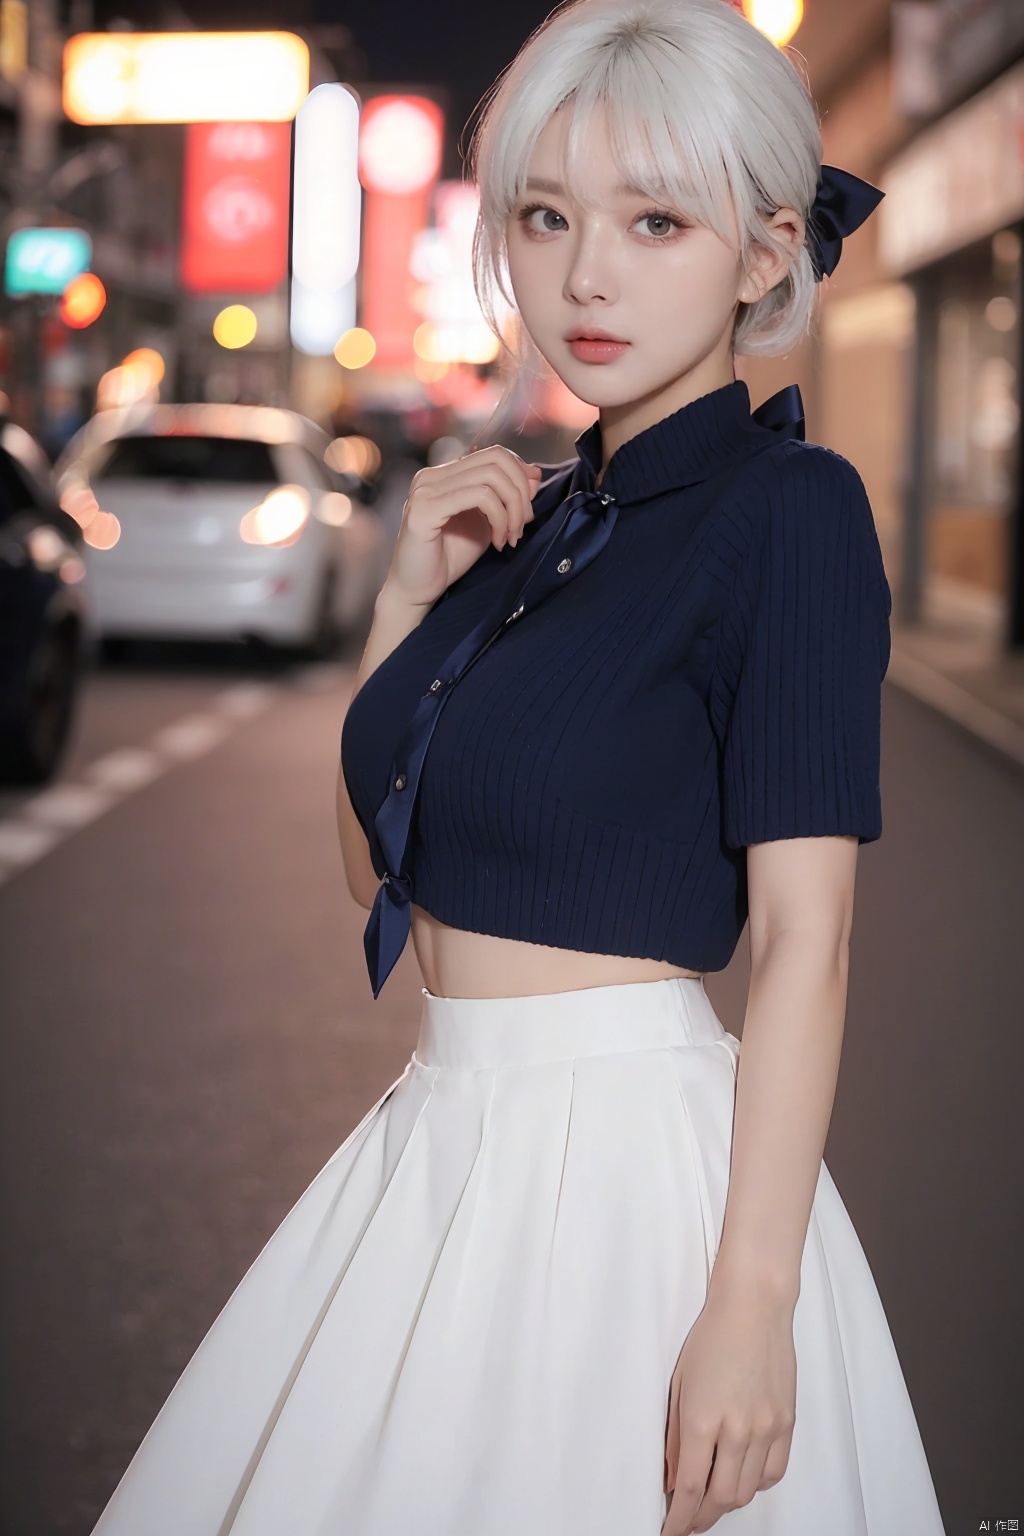  1girl,(8k, RAW photo, best quality, masterpiece:1.3),(realistic,photo-realistic:1.37),(night),(looking at viewer:1.331),(white hair),posing,Tokyo street,nightcityscape, , cyberpunk city,soft light,1girl,extremely beautiful face,bust,put down hands,Random hairstyle,Random expression,big eyes, ,lower abdomen,(short-sleeved 
JK_shirt),JK_style,(dark blue JK_skirt) ,(bow JK_tie),mix4, an extremely delicate and beautiful girl, depth of field, blurry background, blurry foreground, delicate, beautiful, beautiful face, beautiful eyes, beautiful girl, delicate face, delicate girl, 8k wallpaper,(best quality:1.12),(detailed:1.12),(intricate:1.12),(ultra-detailed:1.12),(highres:1.12), hyper detailed,ultra-detailed, high resolution illustration, colorful, 8k wallpaper, highres, Cinematic light, ray tracing, (8k, RAW photo, best quality, masterpiece, ultra highres, ultra detailed:1.2), (realistic, photo-realistic:), HUBG_Beauty_Girl